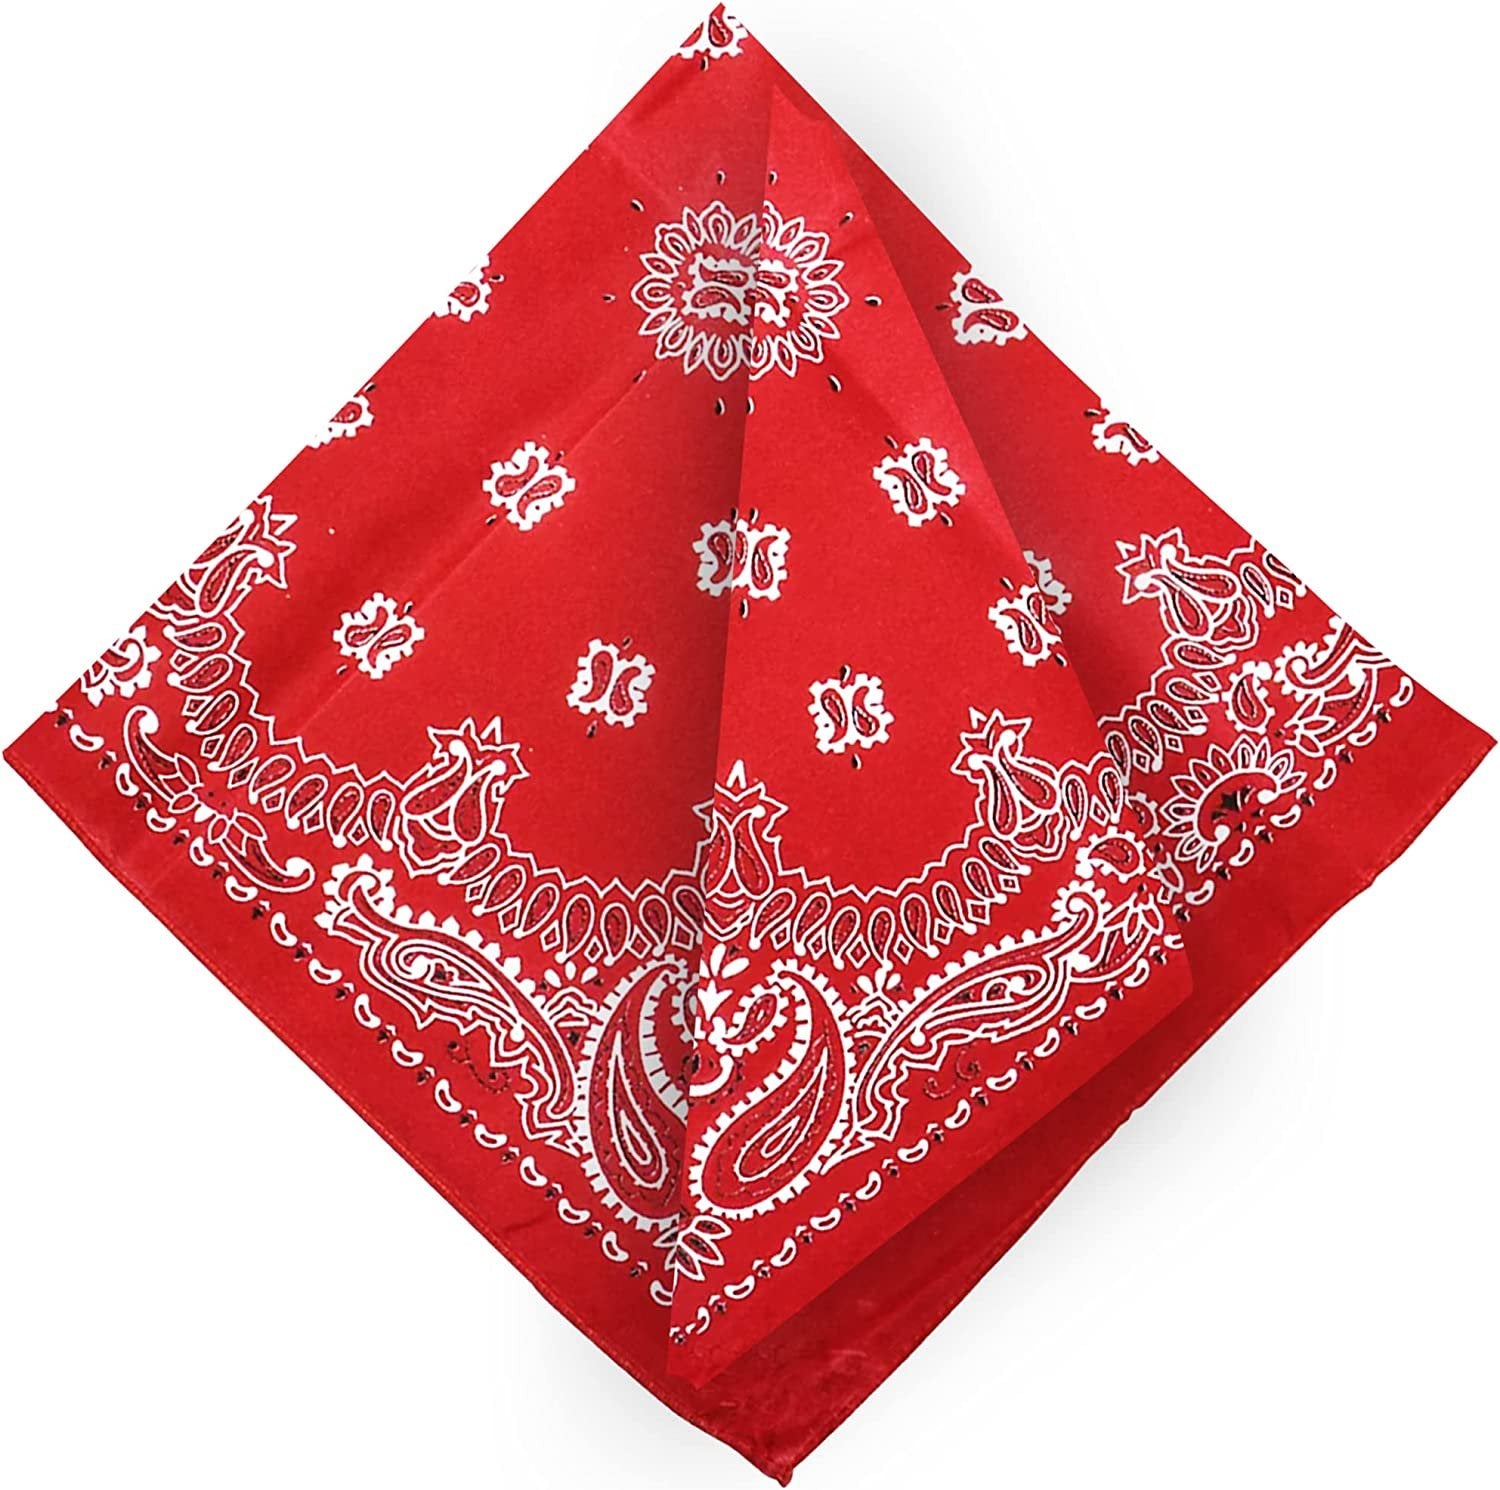 ArtCreativity Red Paisley Bandanas for Kids and Adults, Pack of 3 Polyester Bandana Headbands, Bandanas for Costume, Toy Story Party Favors, Cowboy Supplies, Decorations